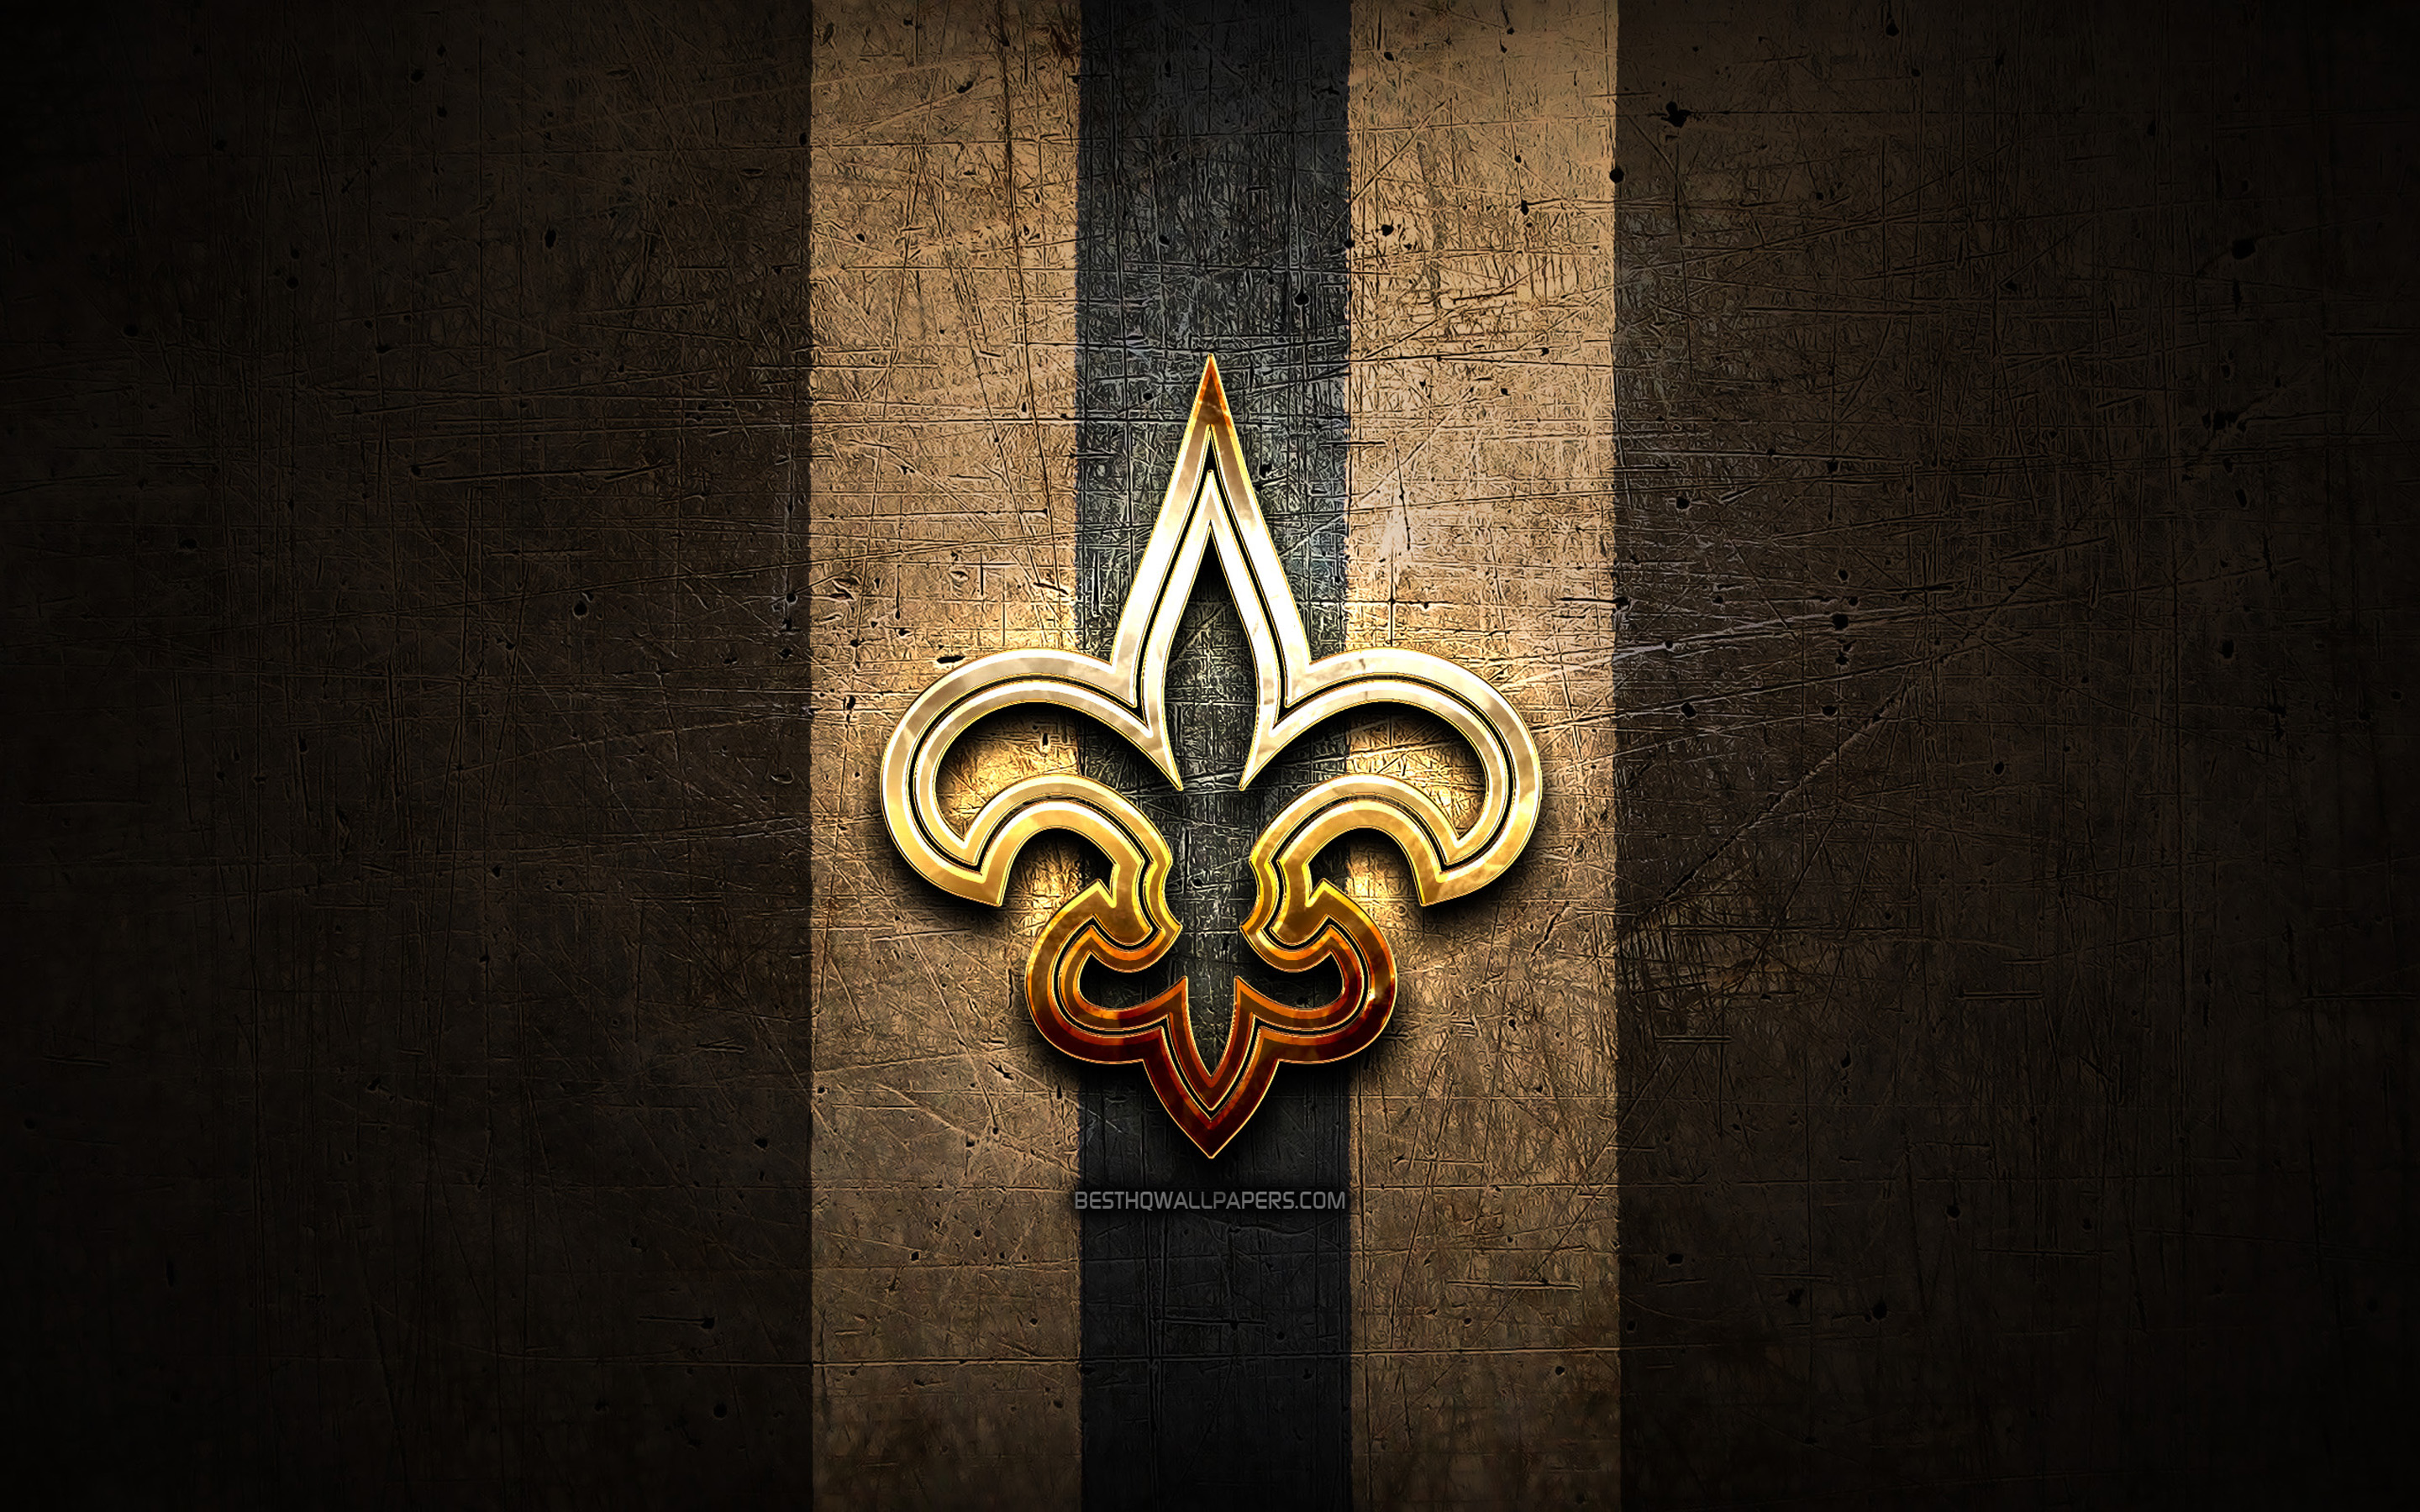 Download wallpaper New Orleans Saints, golden logo, NFL, brown metal background, american football club, New Orleans Saints logo, american football, USA for desktop with resolution 2880x1800. High Quality HD picture wallpaper